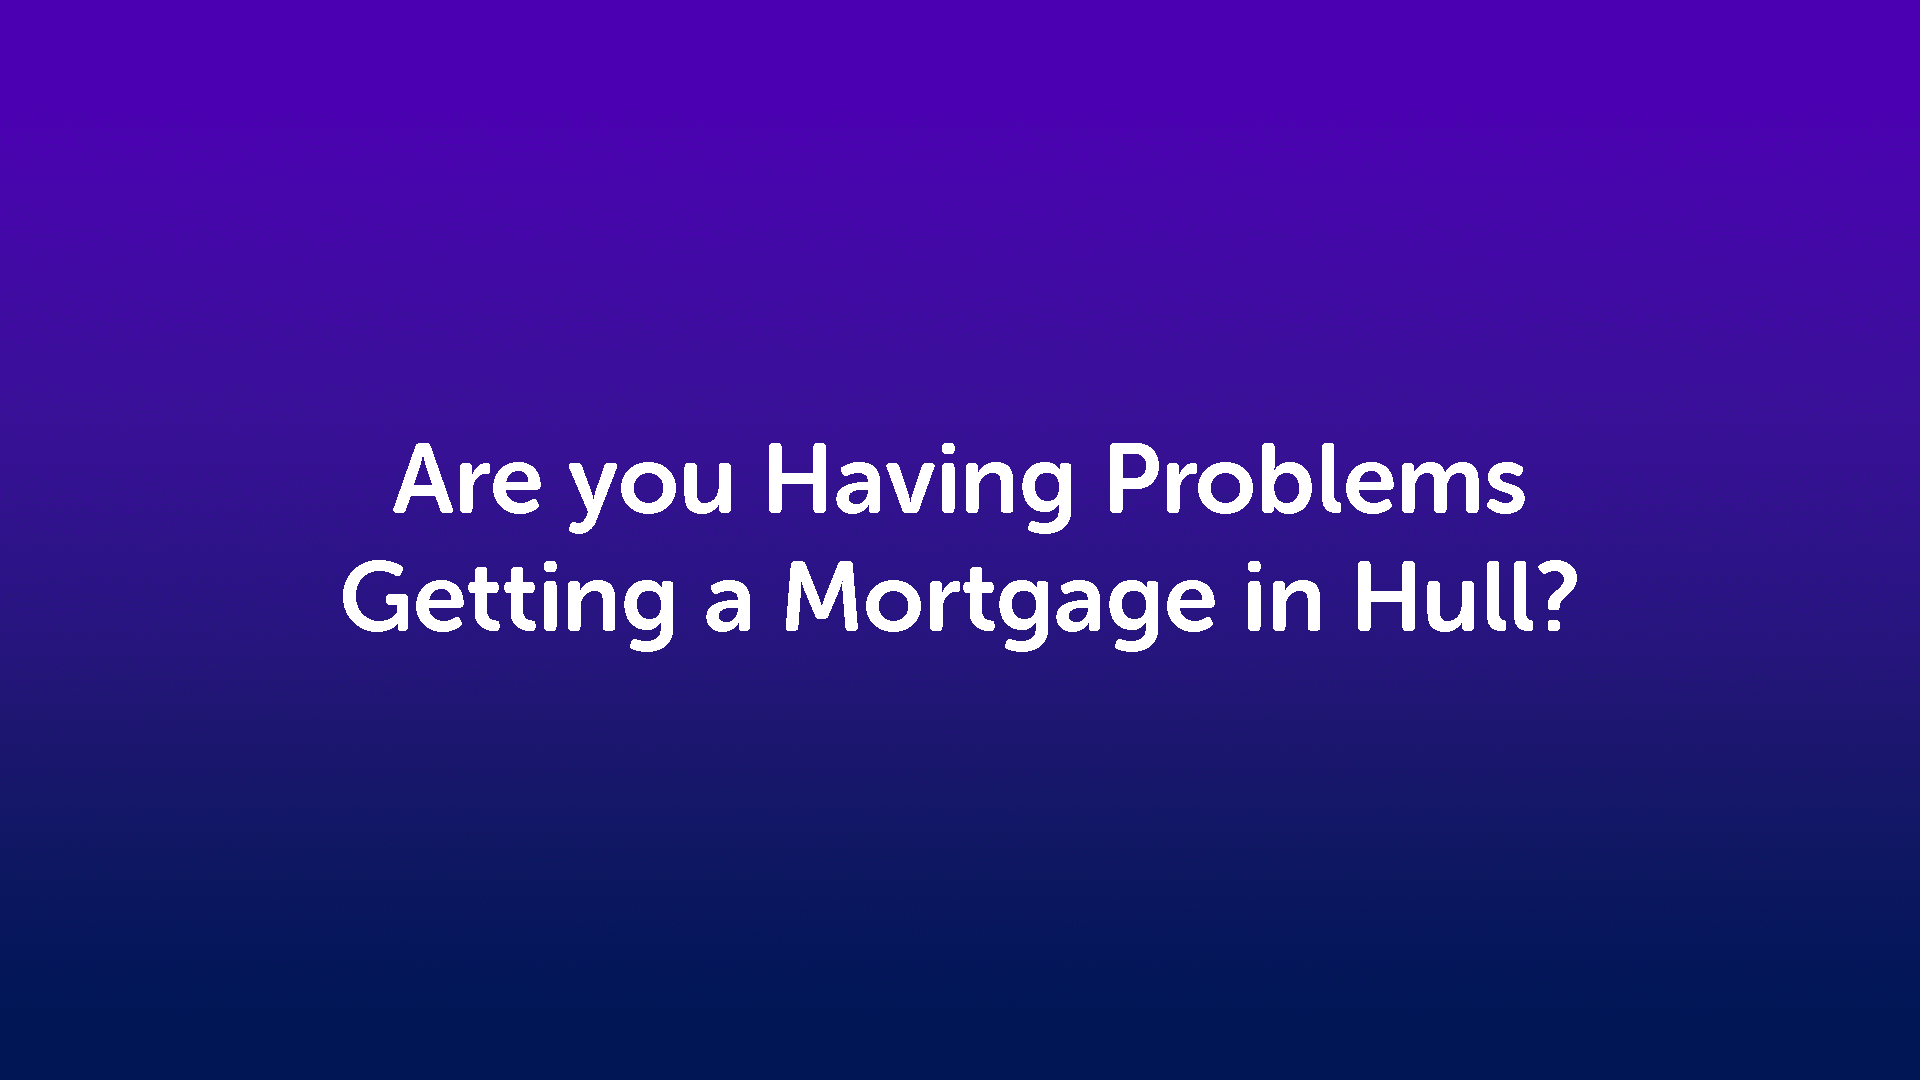 Are you Having Problems Getting a Mortgage in Hull?